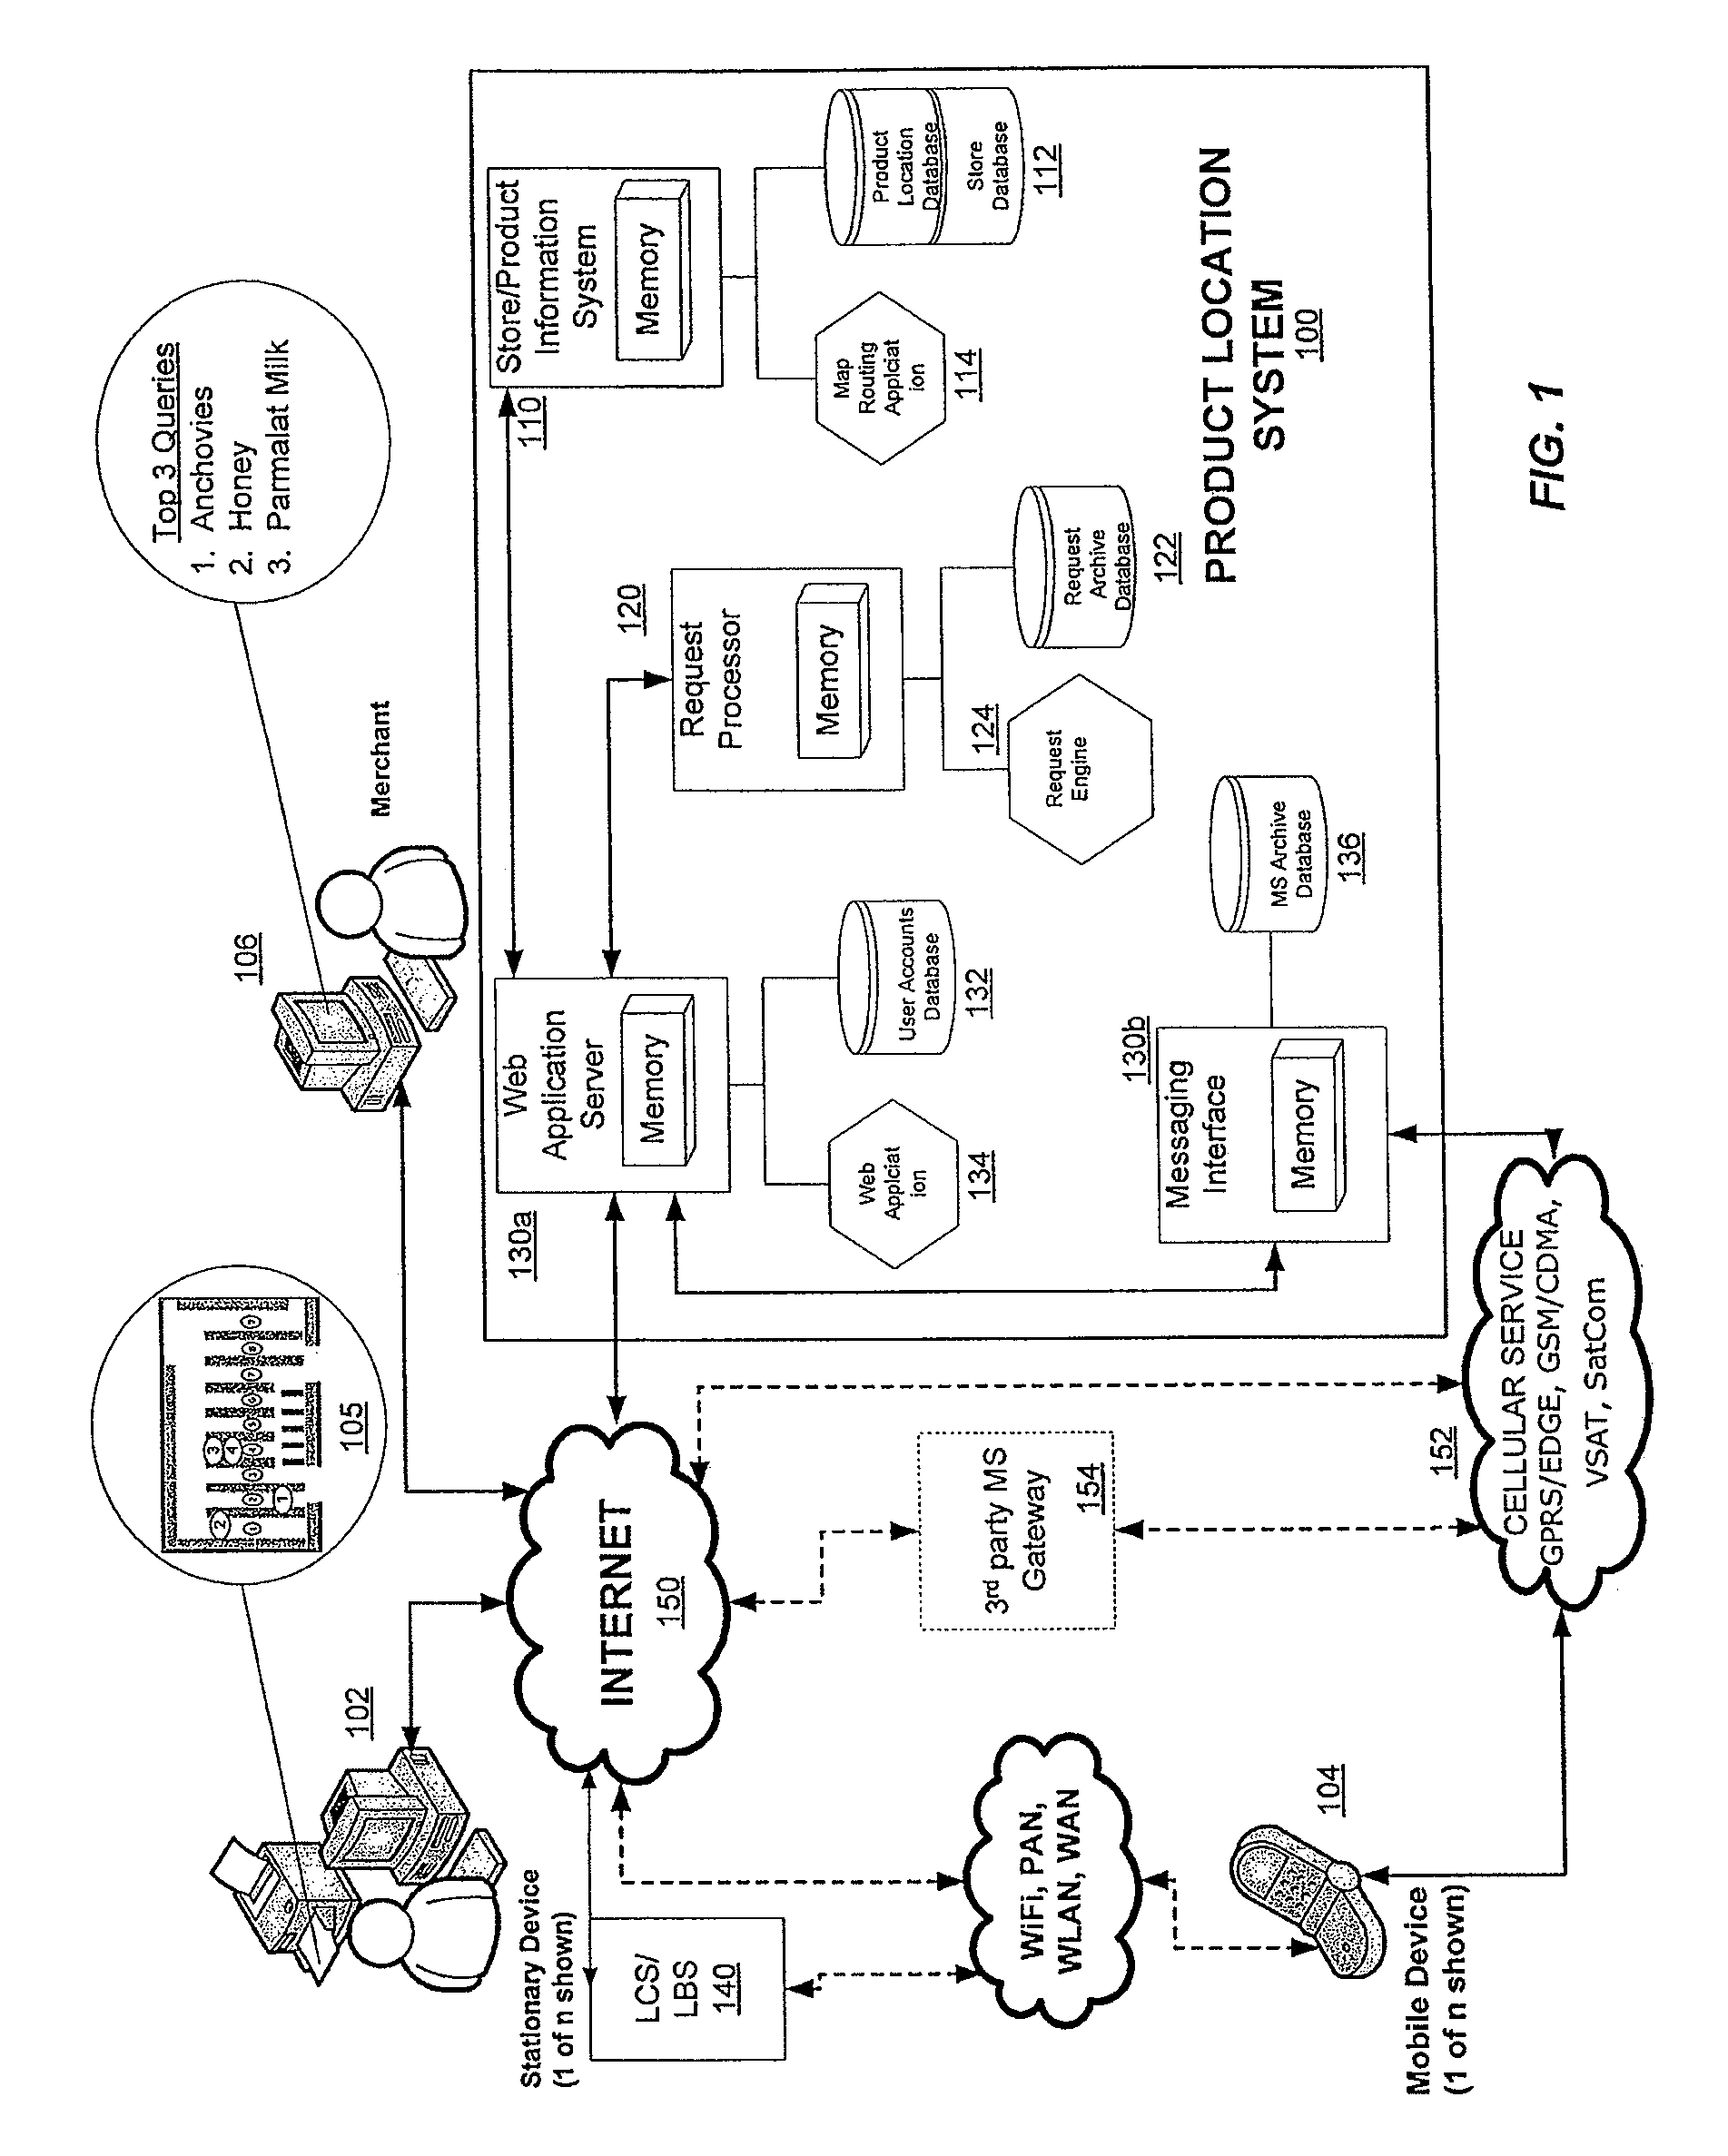 Retail Store Product Location Service System and Method